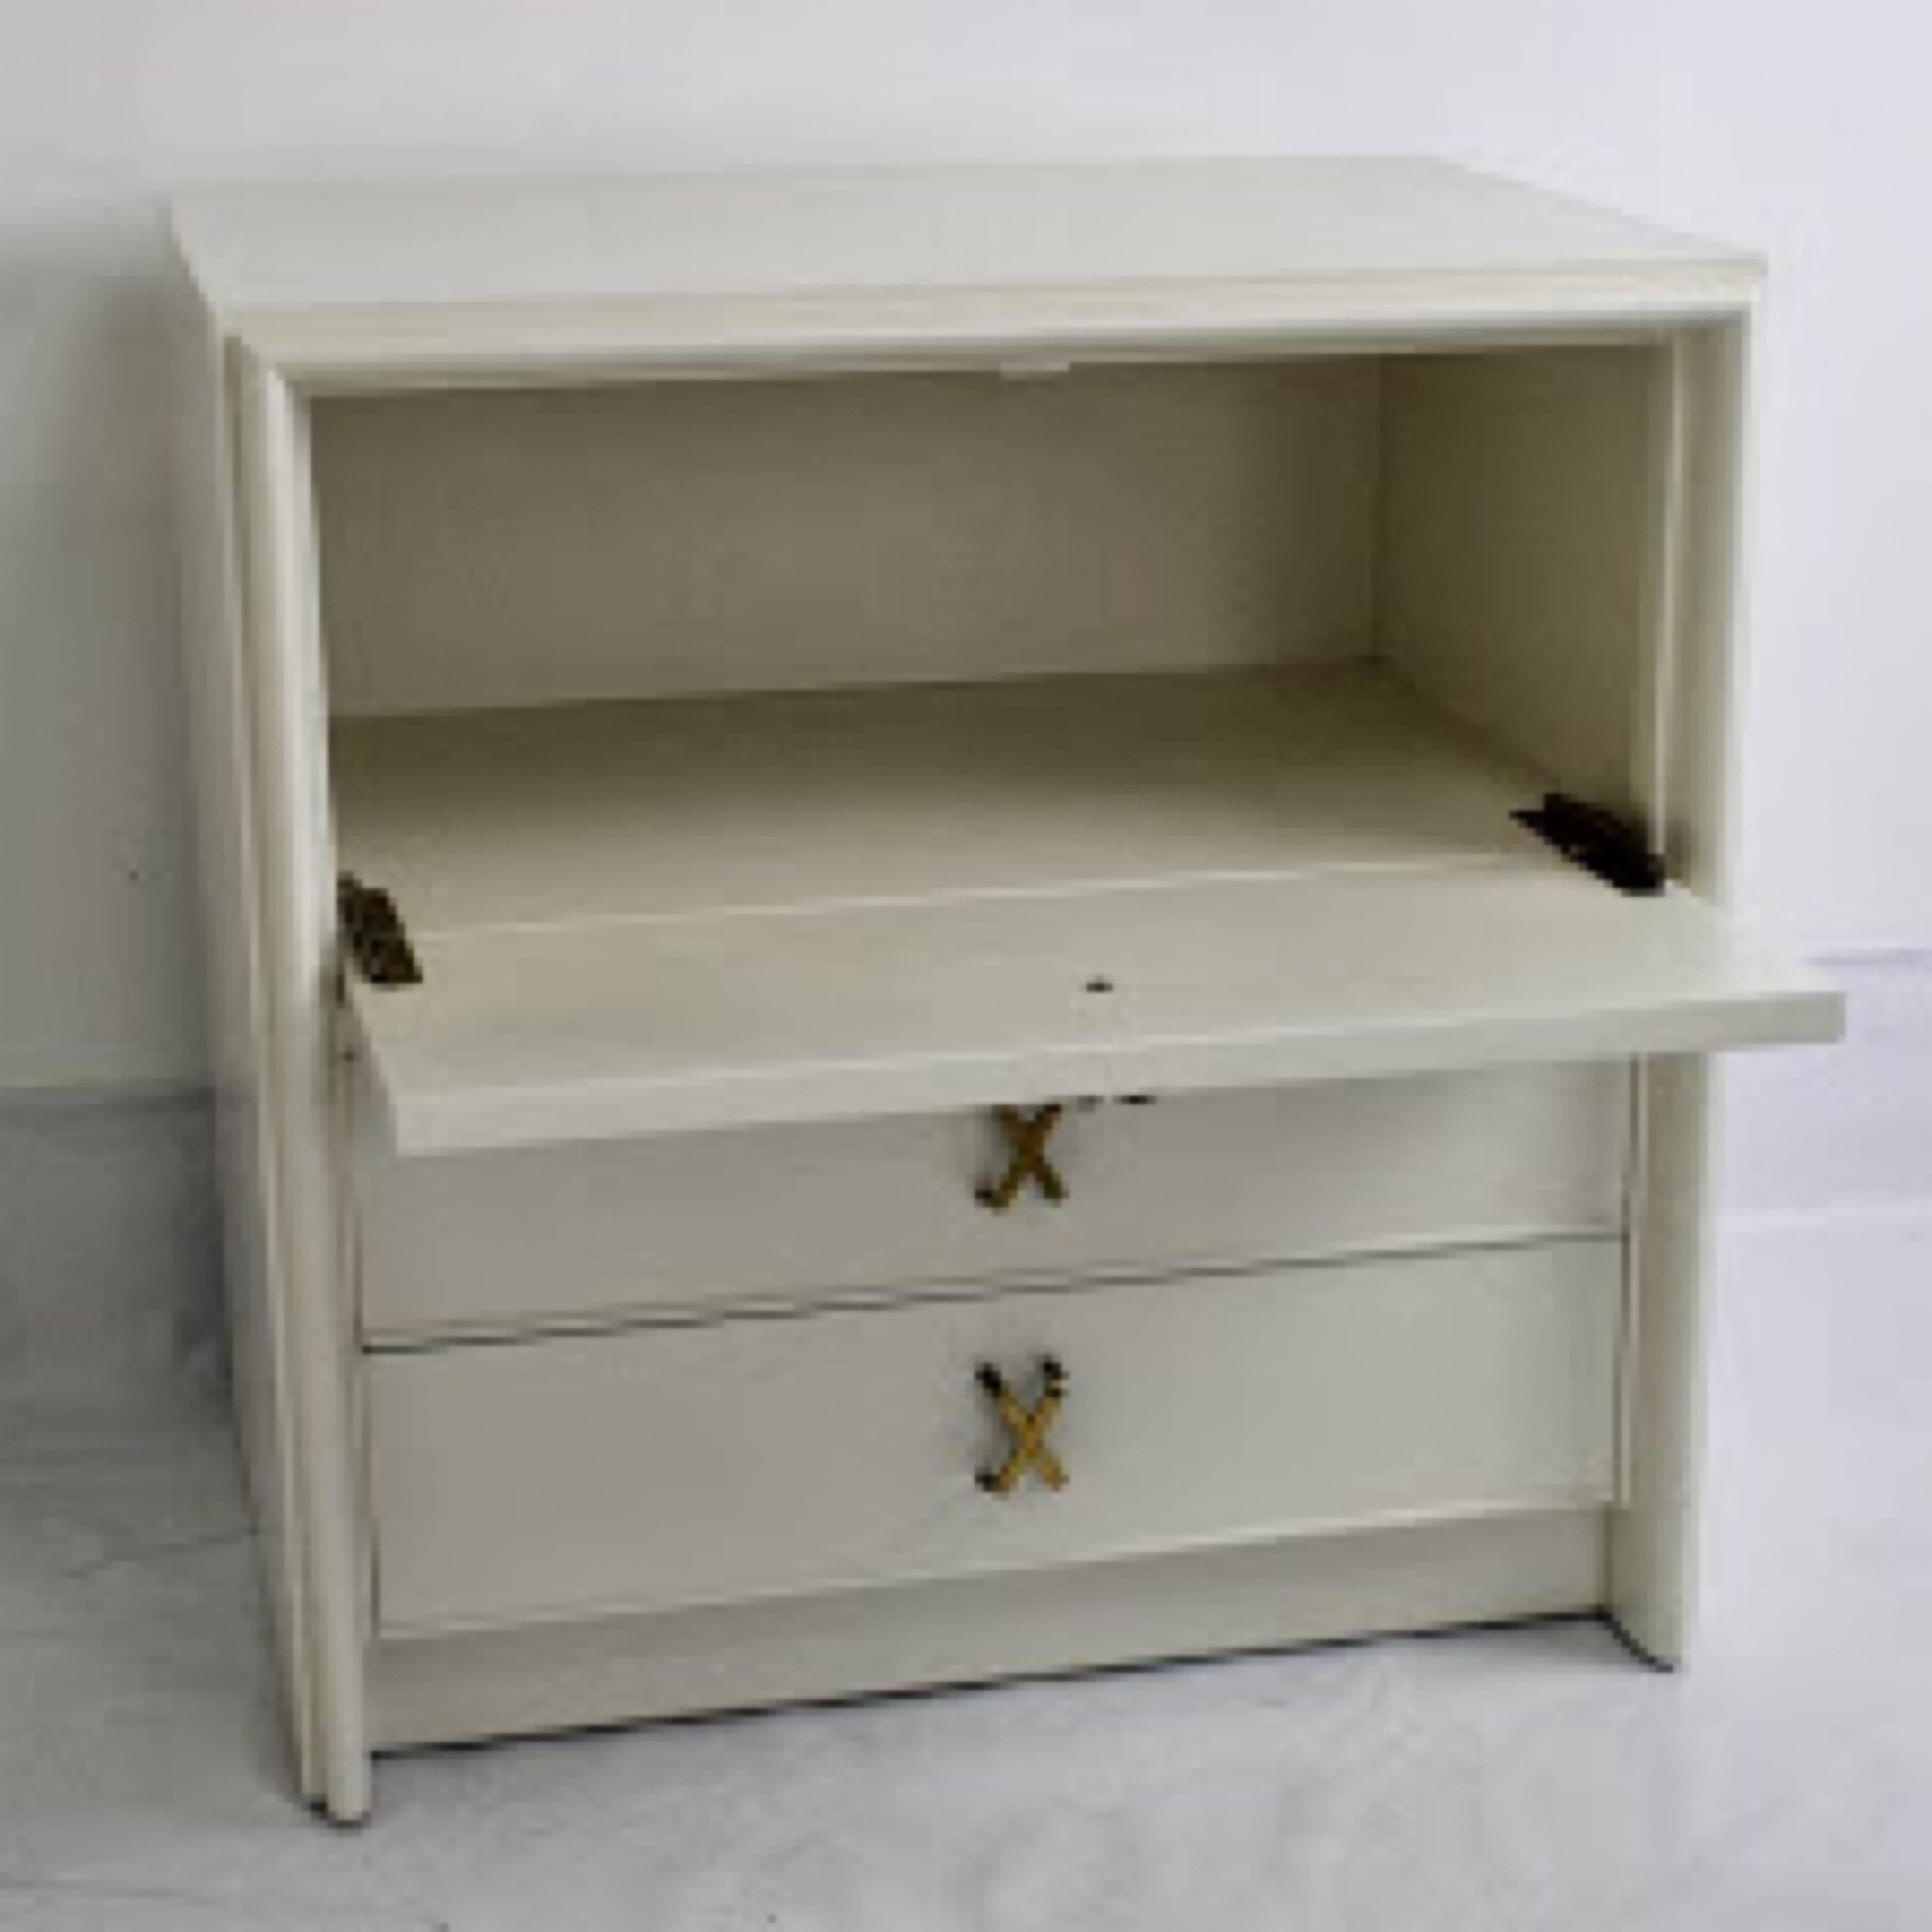 Pair of nightstands or small chests, designed by Paul Frankl for Johnson Furniture. Shown in ivory lacquer but can be finished in custom color with wood stain. Top drawer has drop down feature as a writing surface. Two bottom pull-out drawers below.